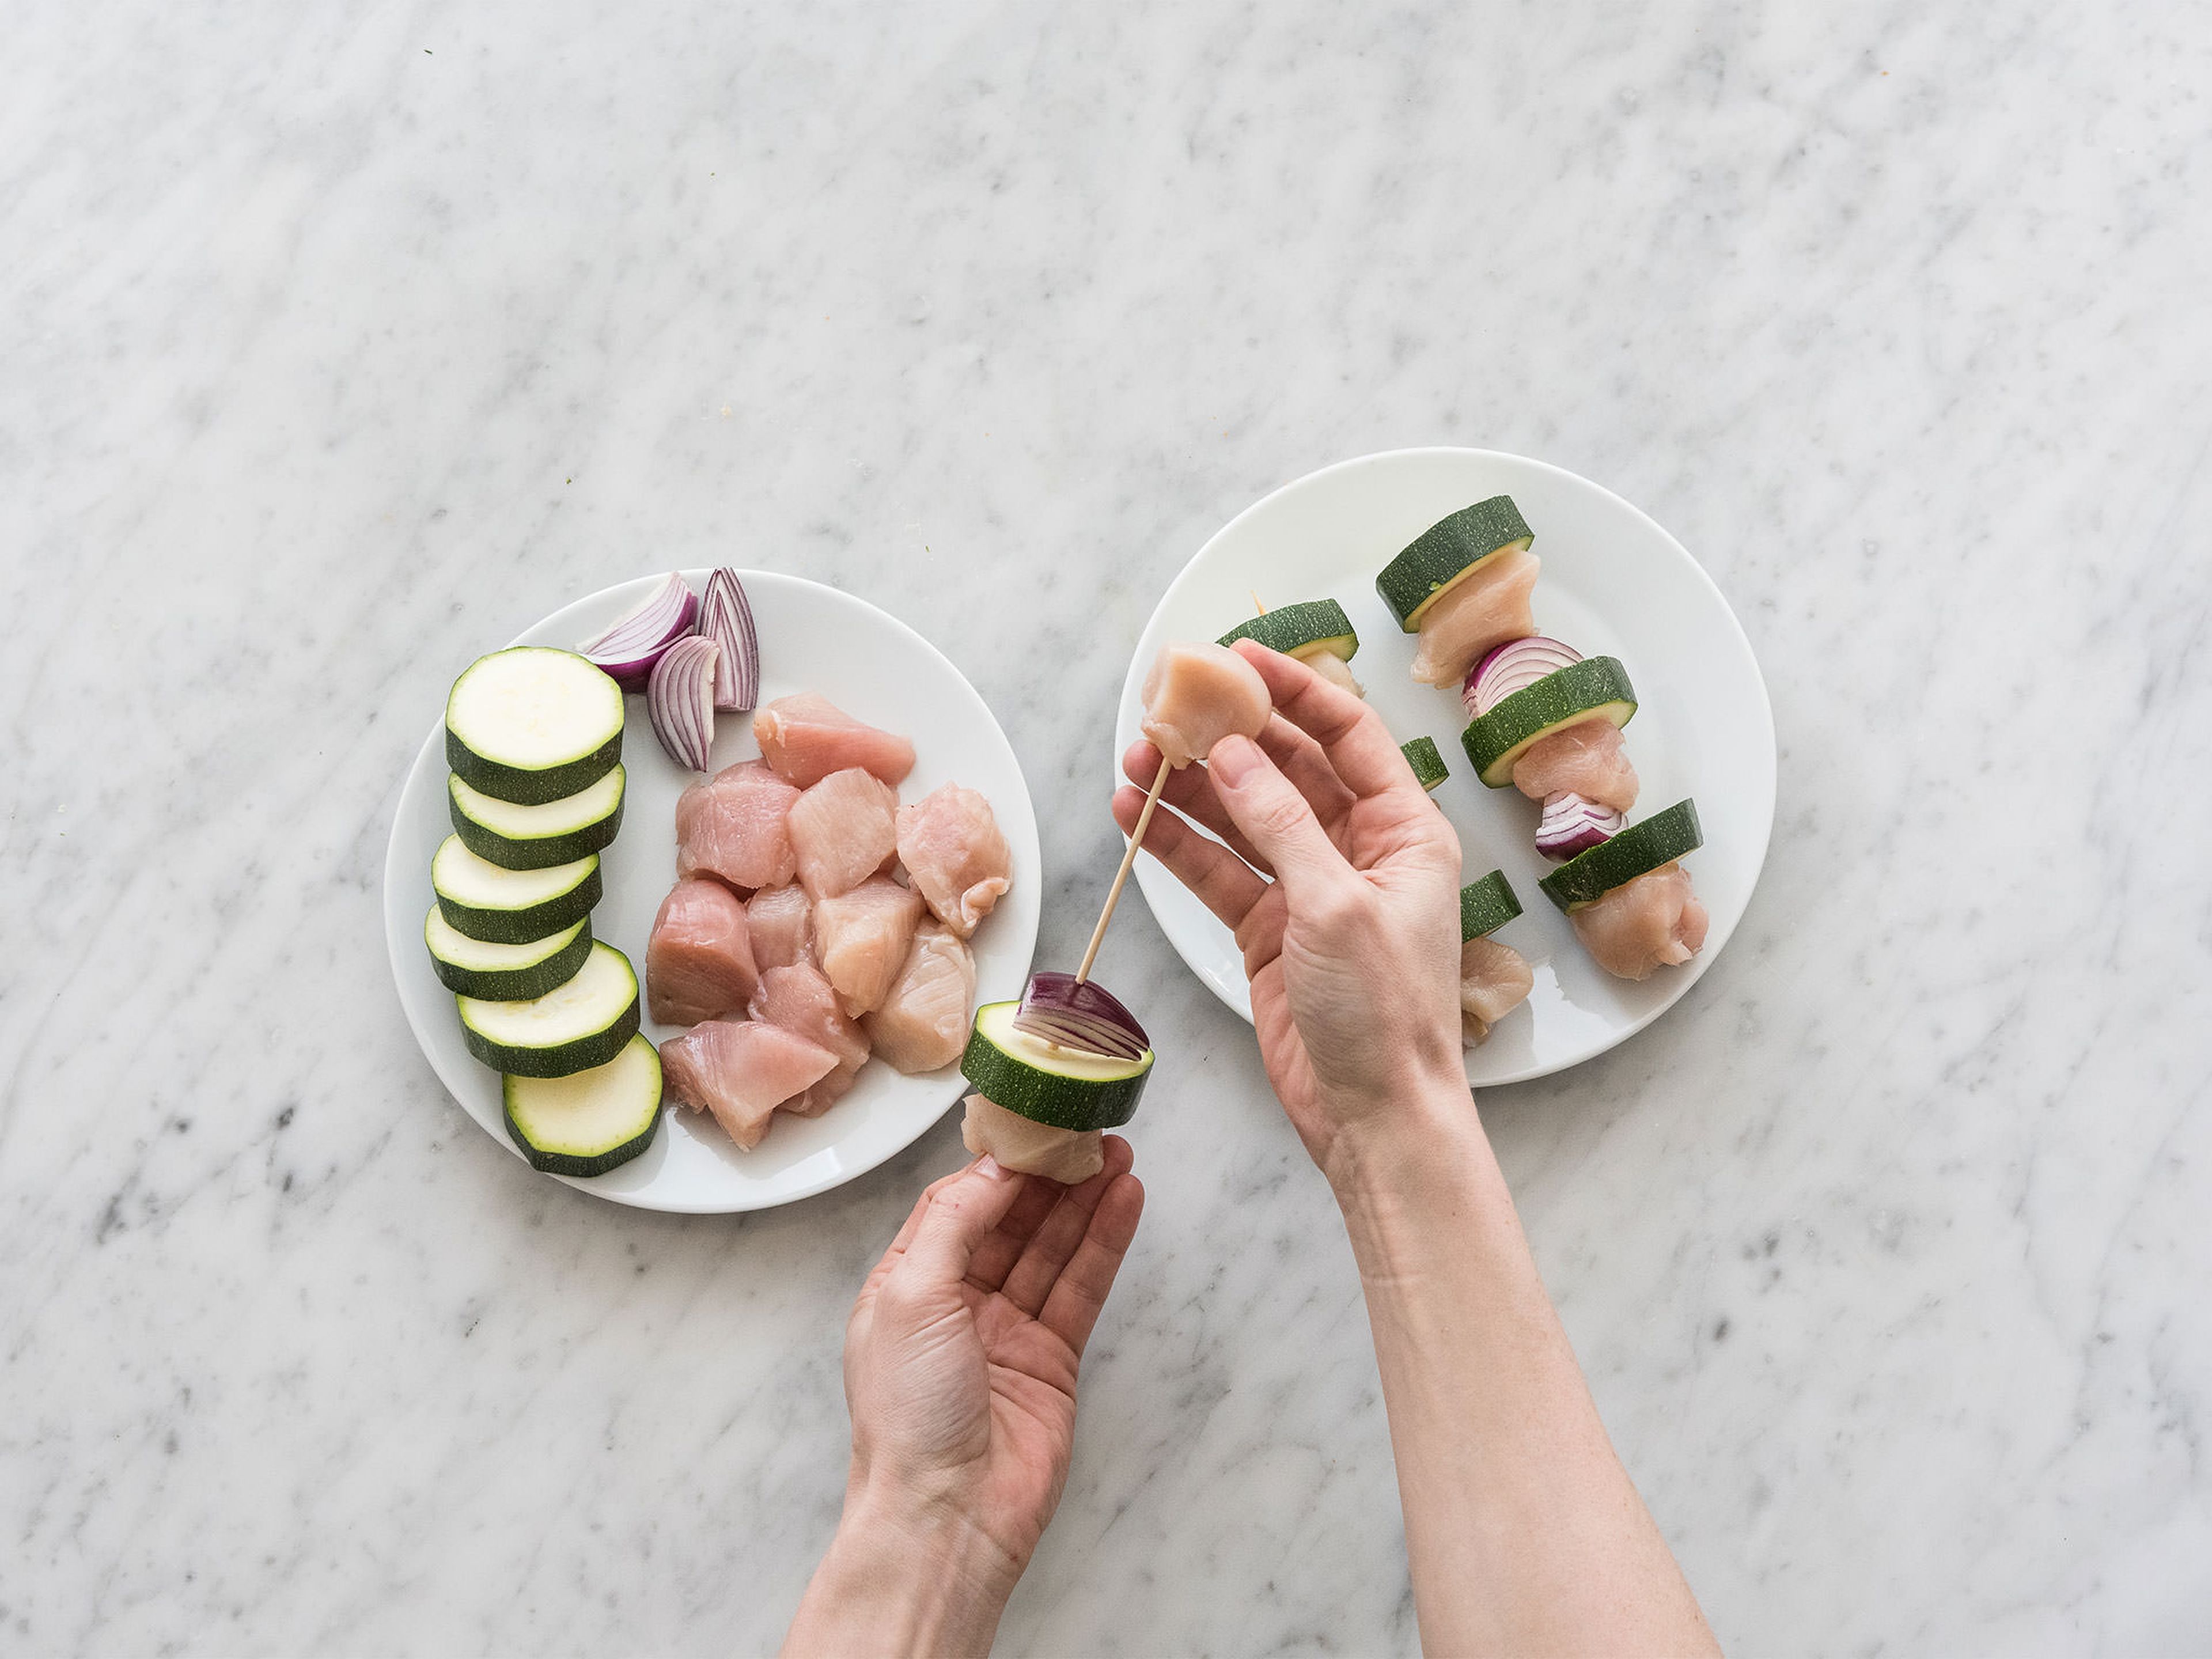 Preheat oven to 200°C/390°F. Thread chicken, zucchini, and red onion onto wooden skewers. In a large frying pan, heat up olive oil over medium heat and sauté skewers for approx. 2 – 3 min. per side. Then, place on a parchment paper-lined baking sheet and place in preheated oven at 200°C/390°F and bake for approx. 10 – 12 min.